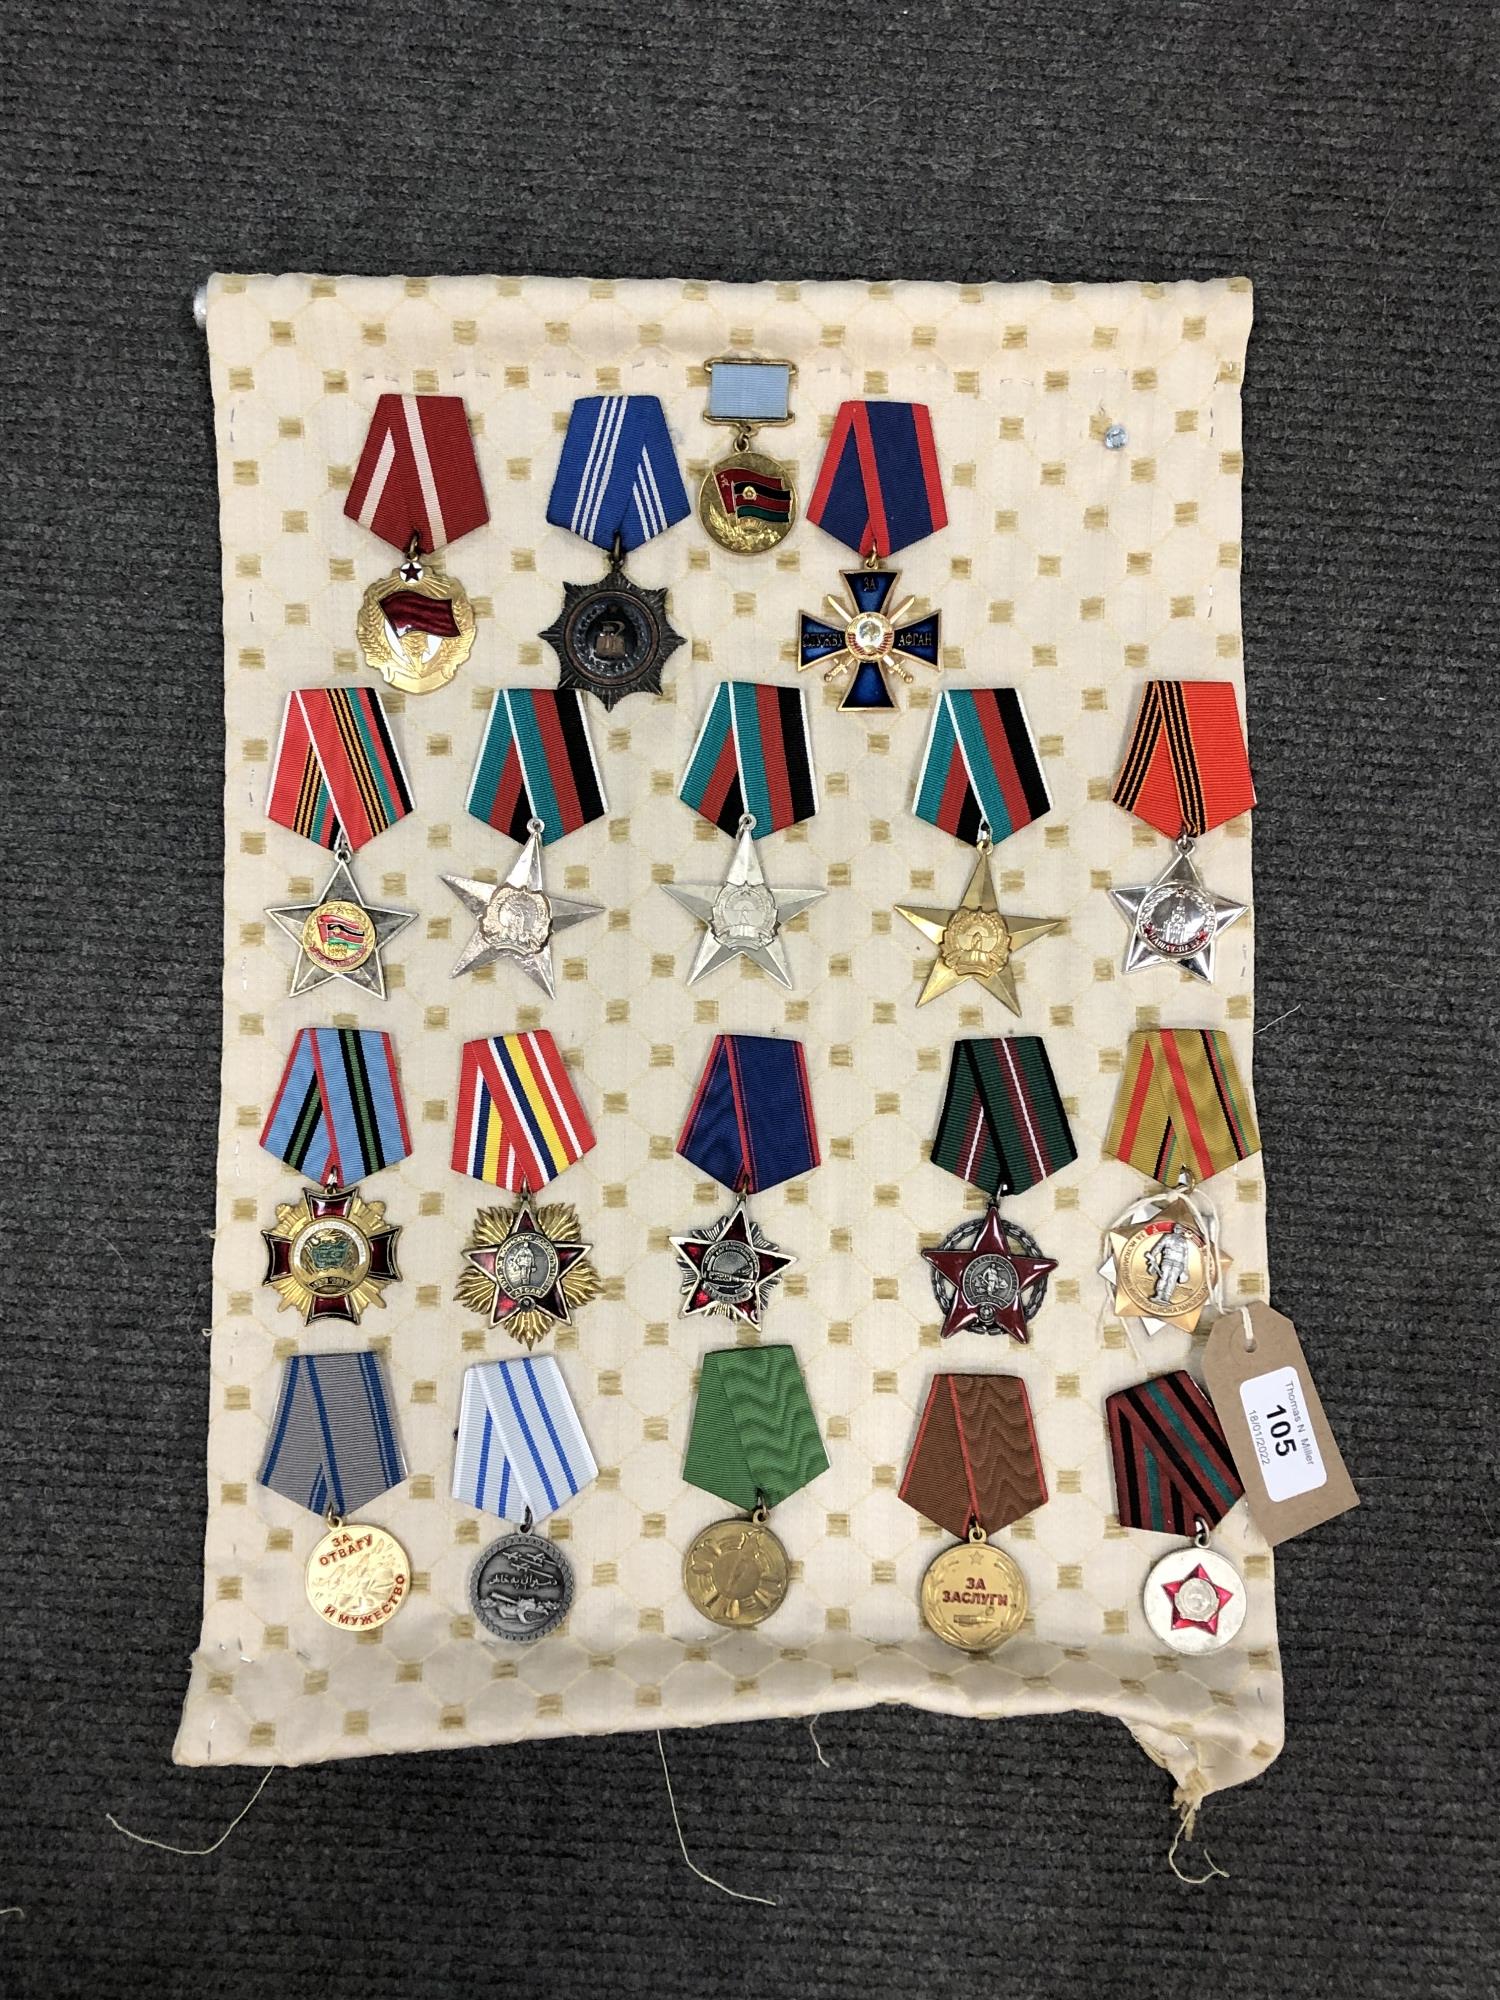 Approximately nineteen reproduction medals and badges of Russian/ Eastern European interest (19)